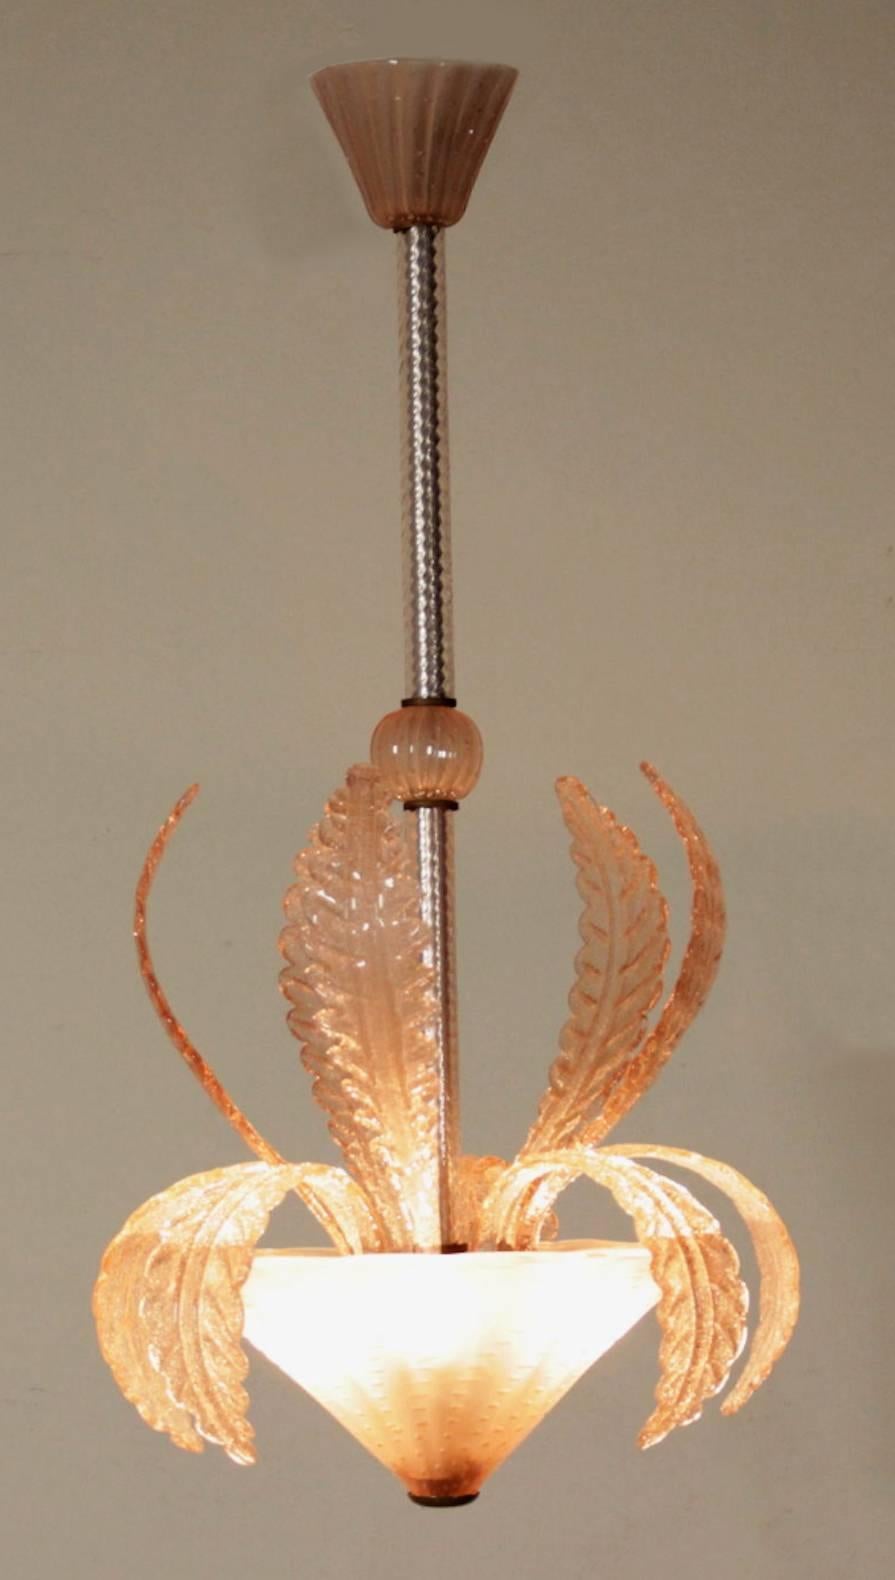 Italian Charming Chandelier by Barovier & Toso, Murano, 1940s